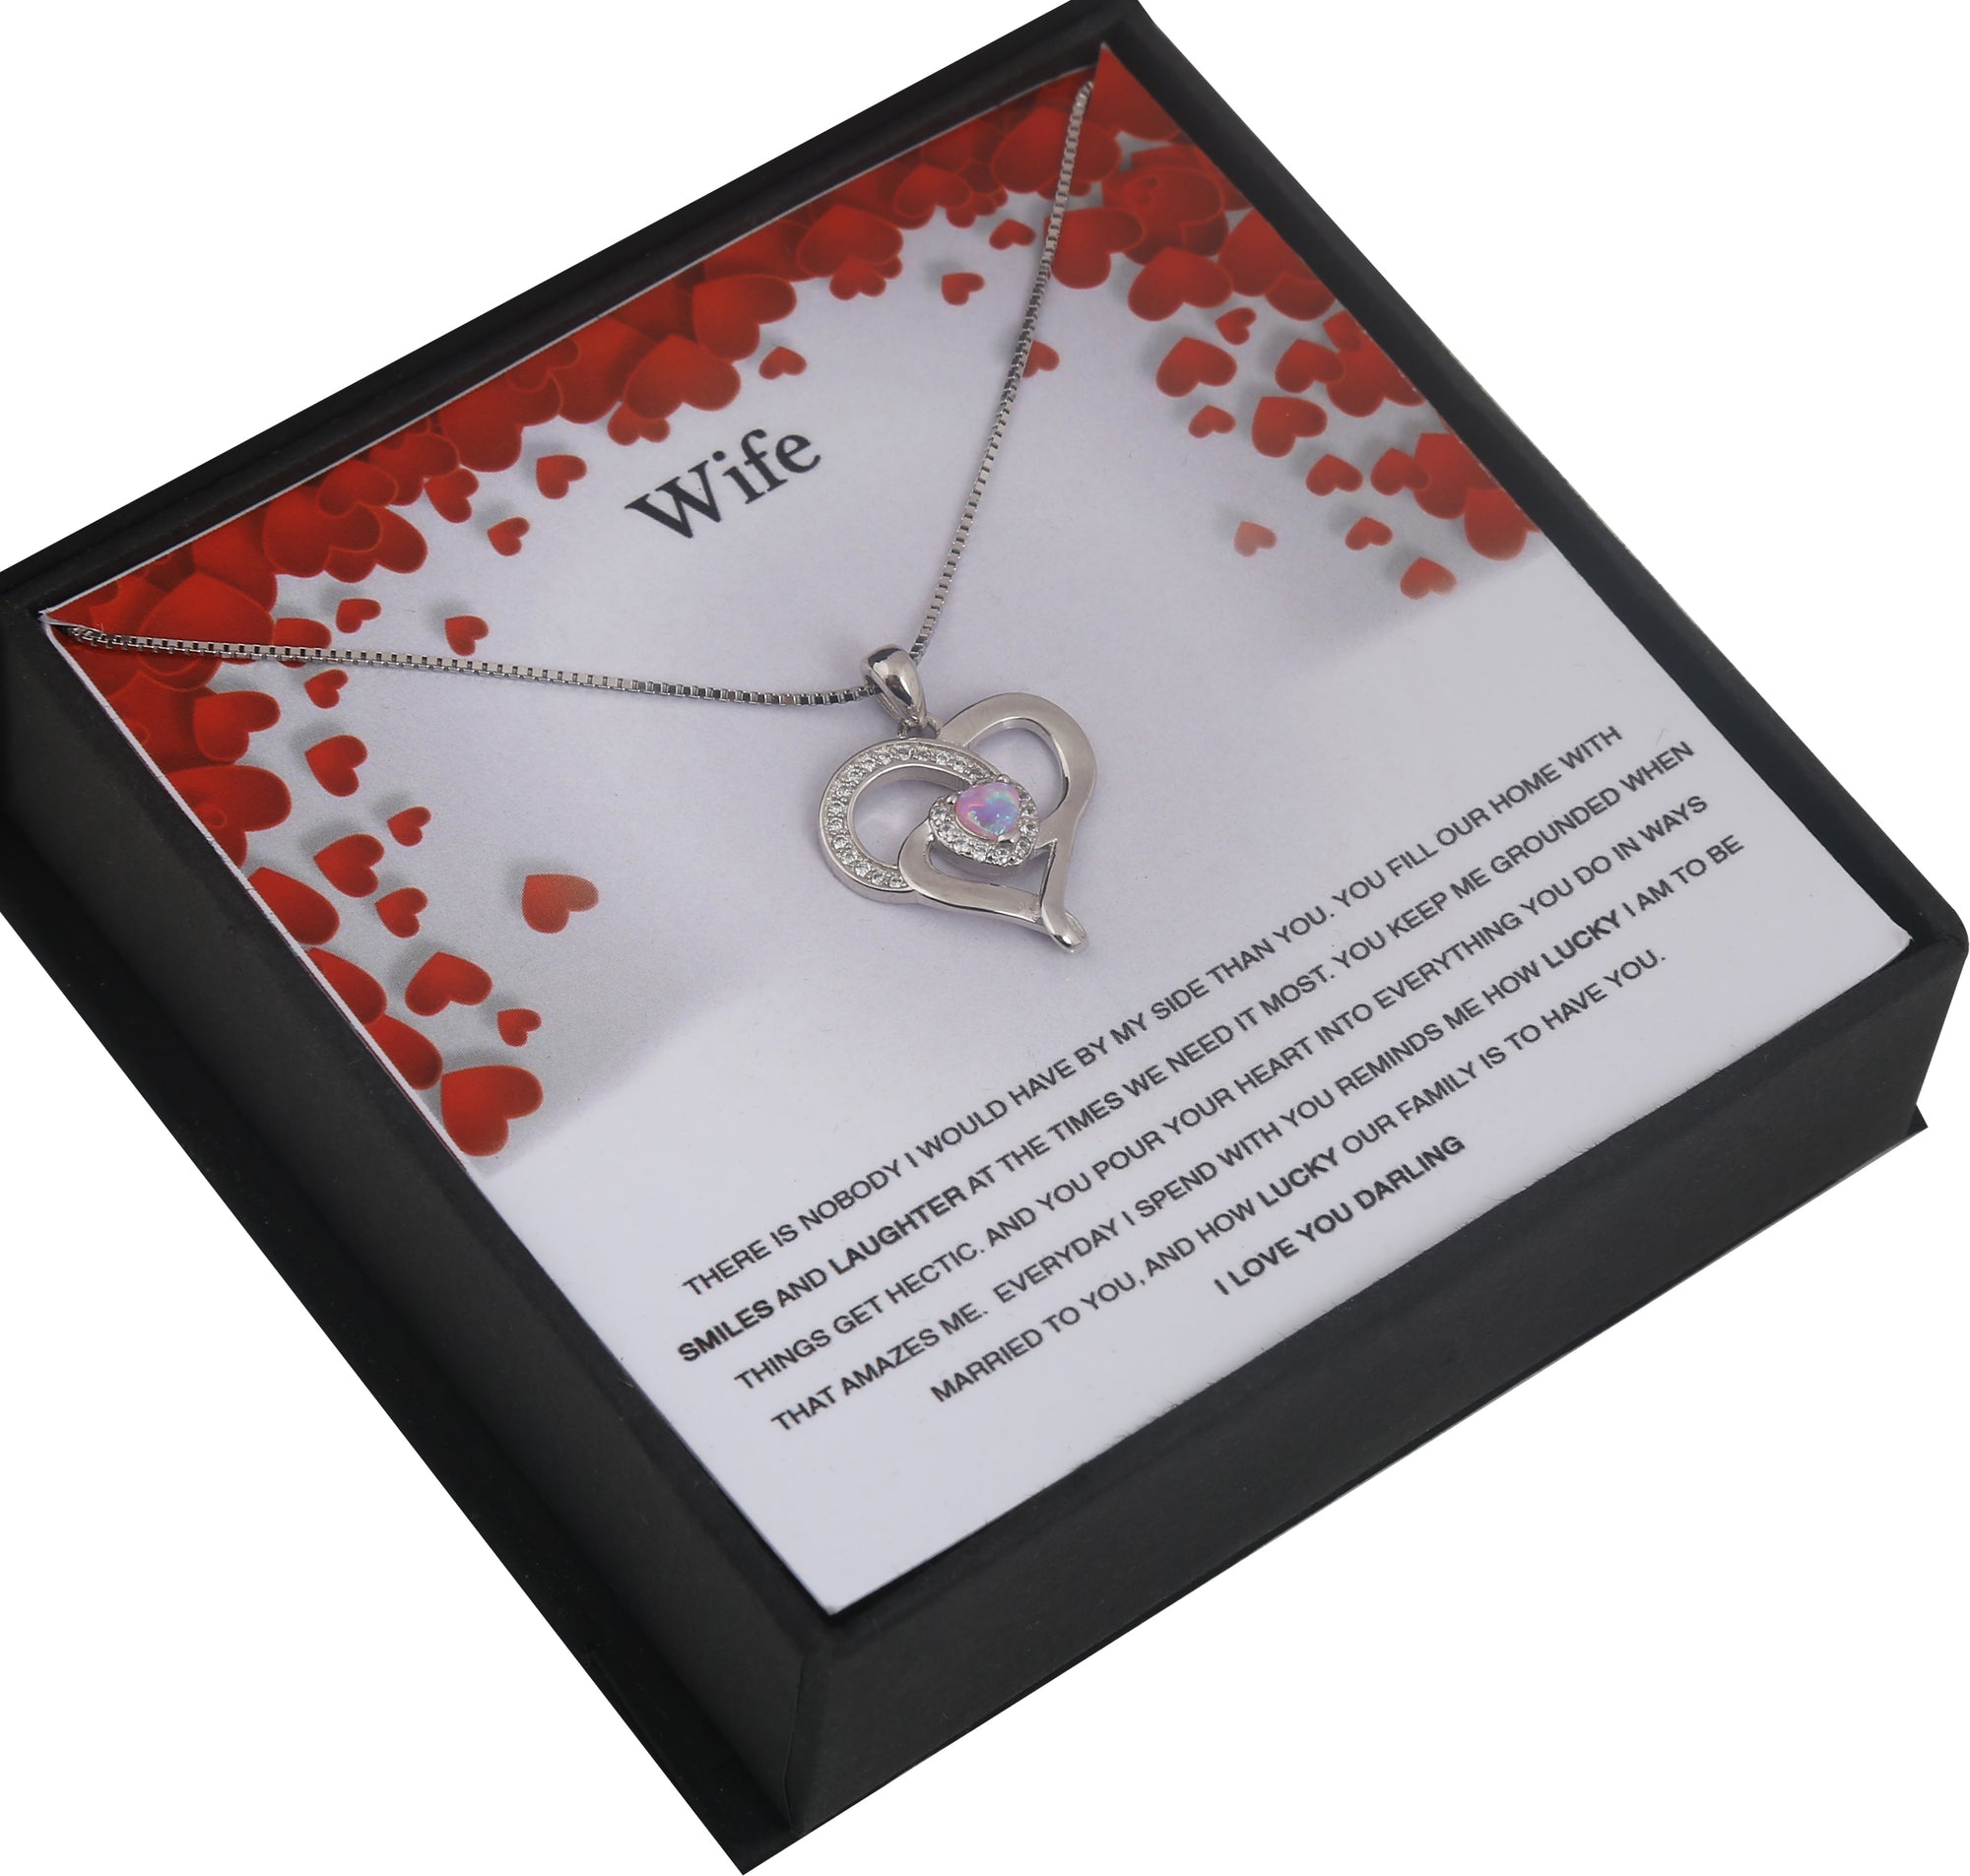 Wife Personalised Gift With Sterling Silver Pendant Necklace